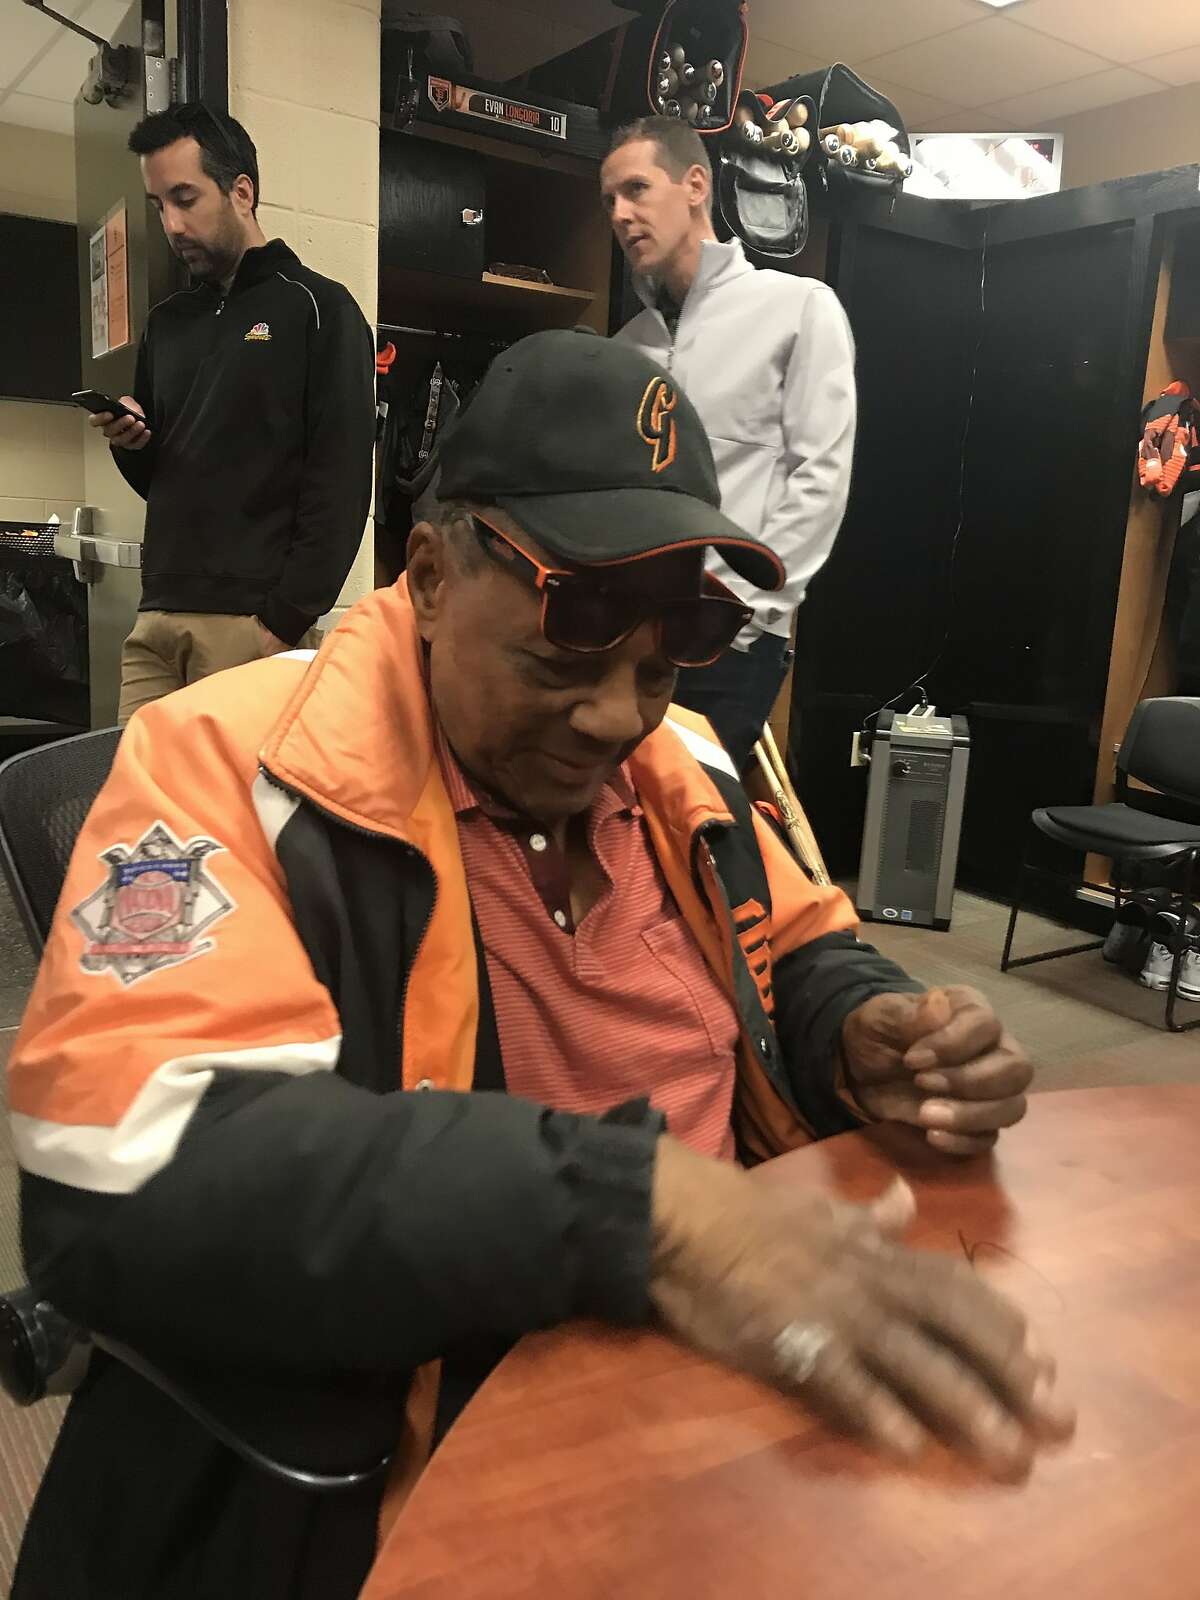 Willie Mays in the Giants Scottsdale clubhouse